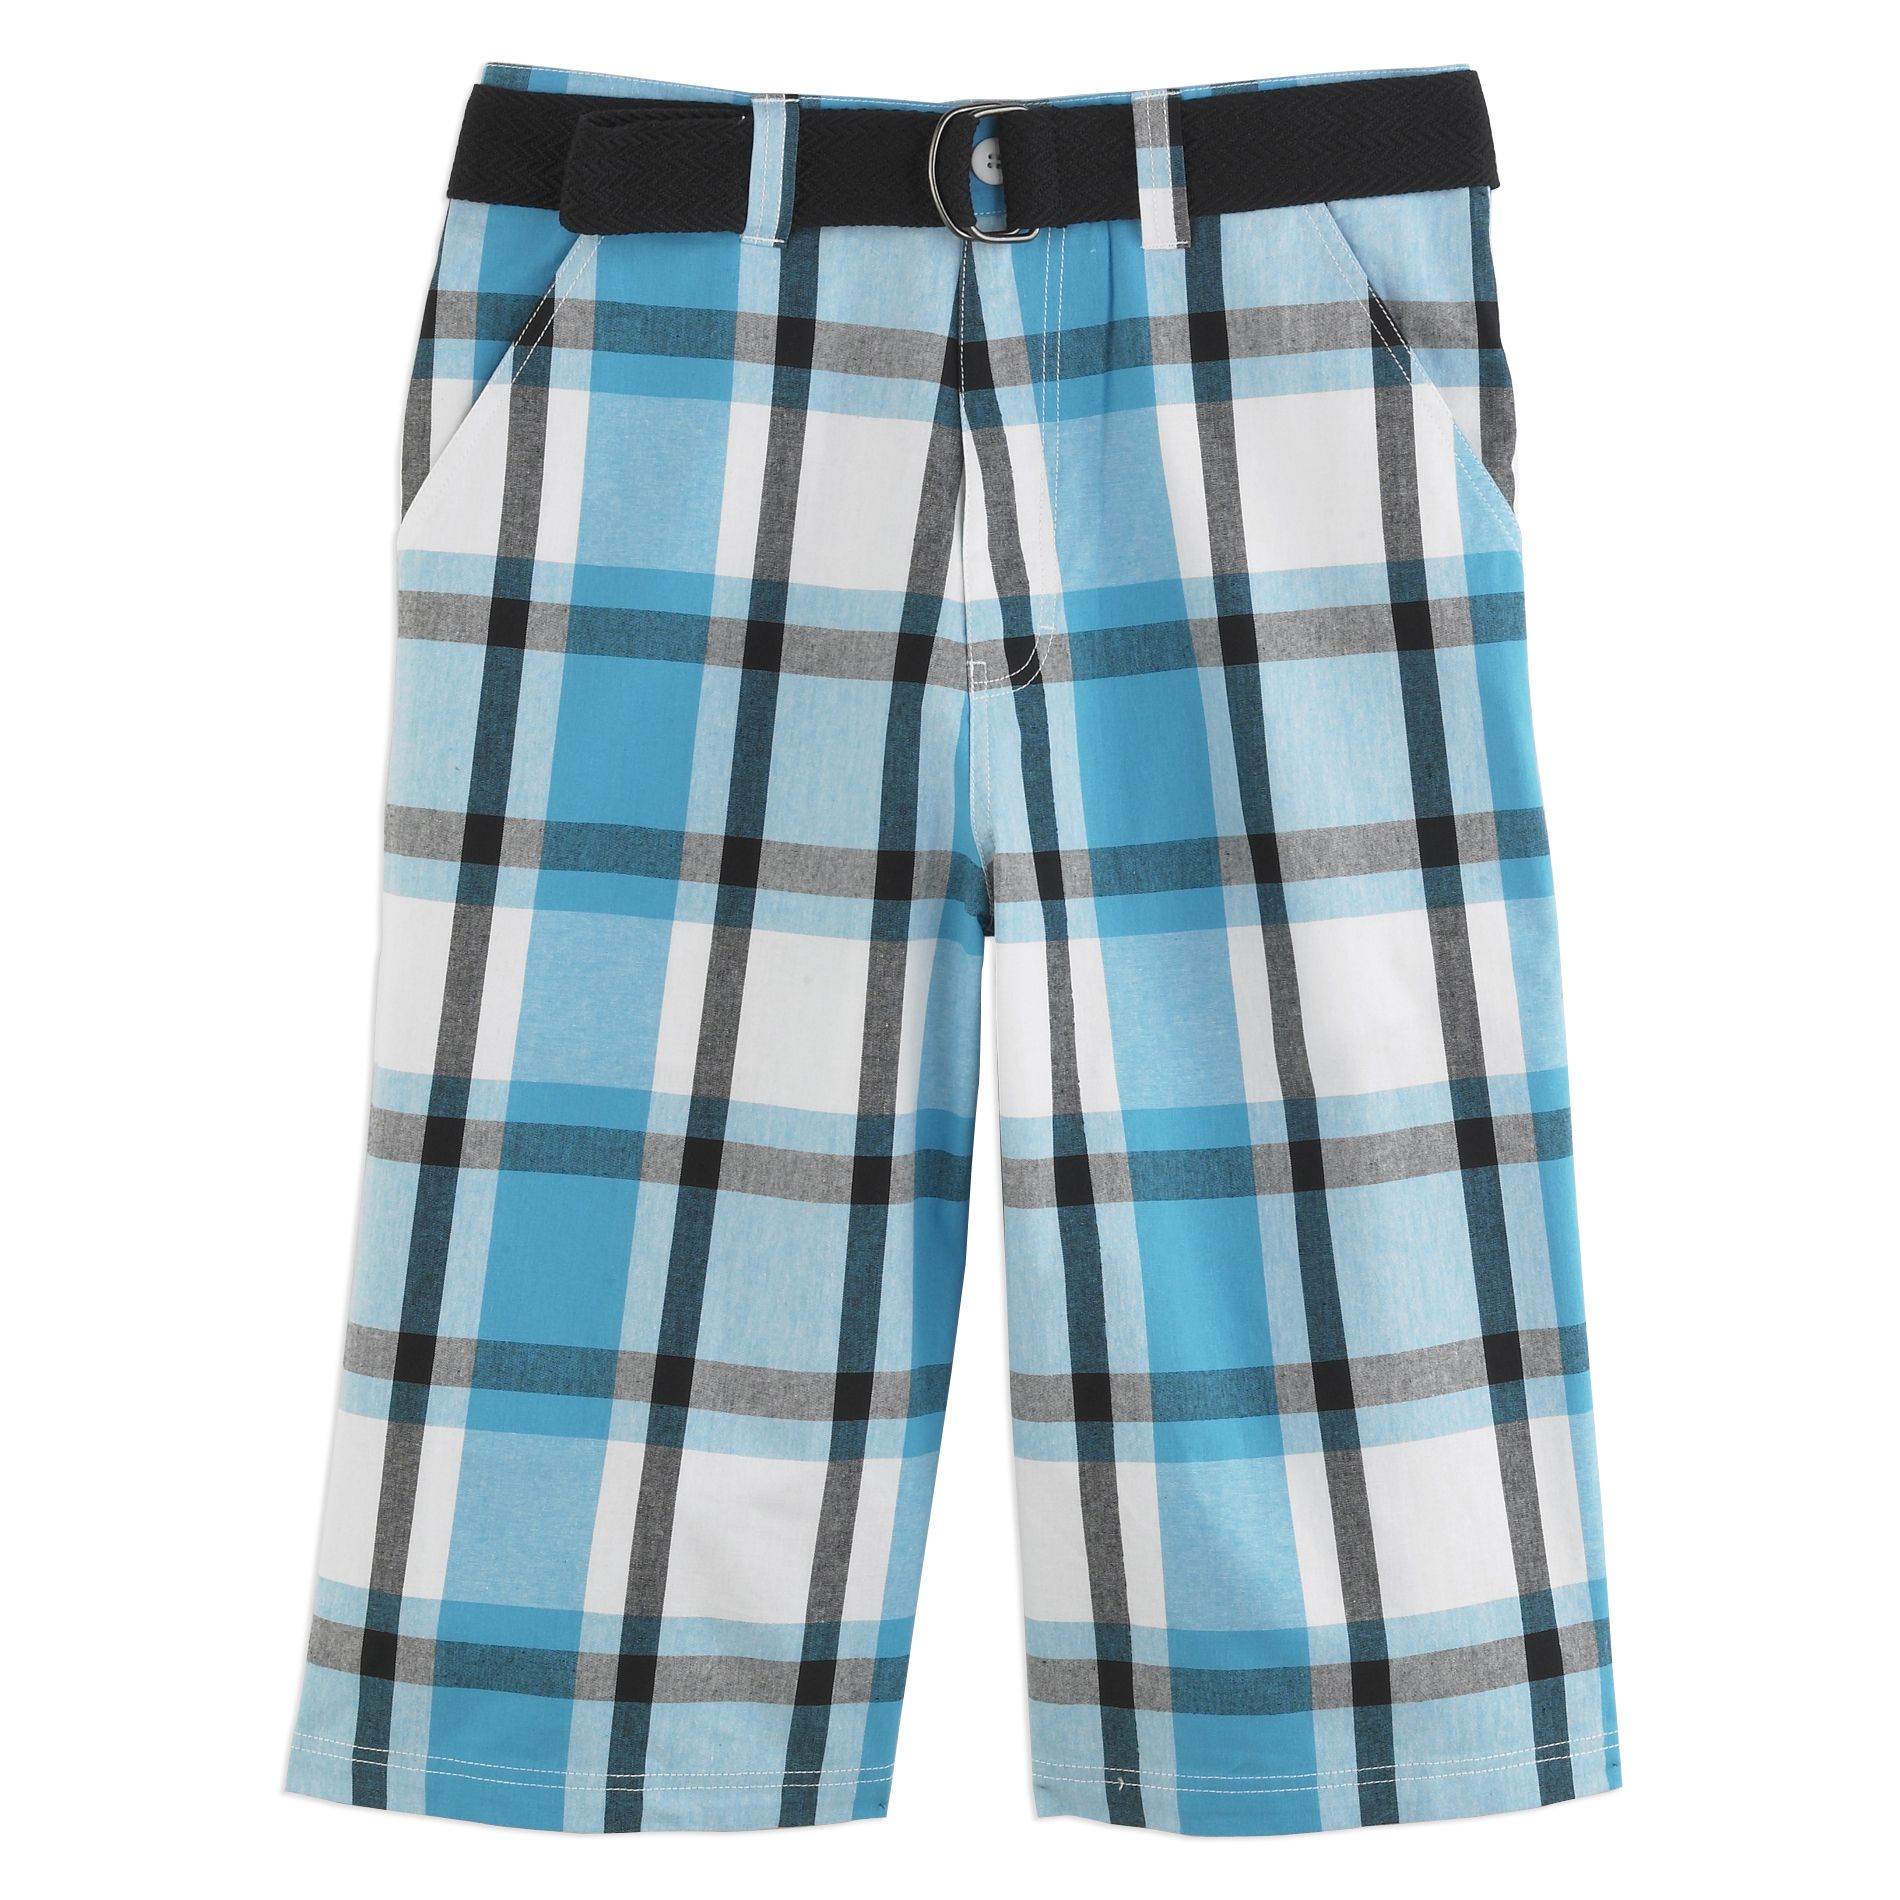 Southpole Belted Plaid Short